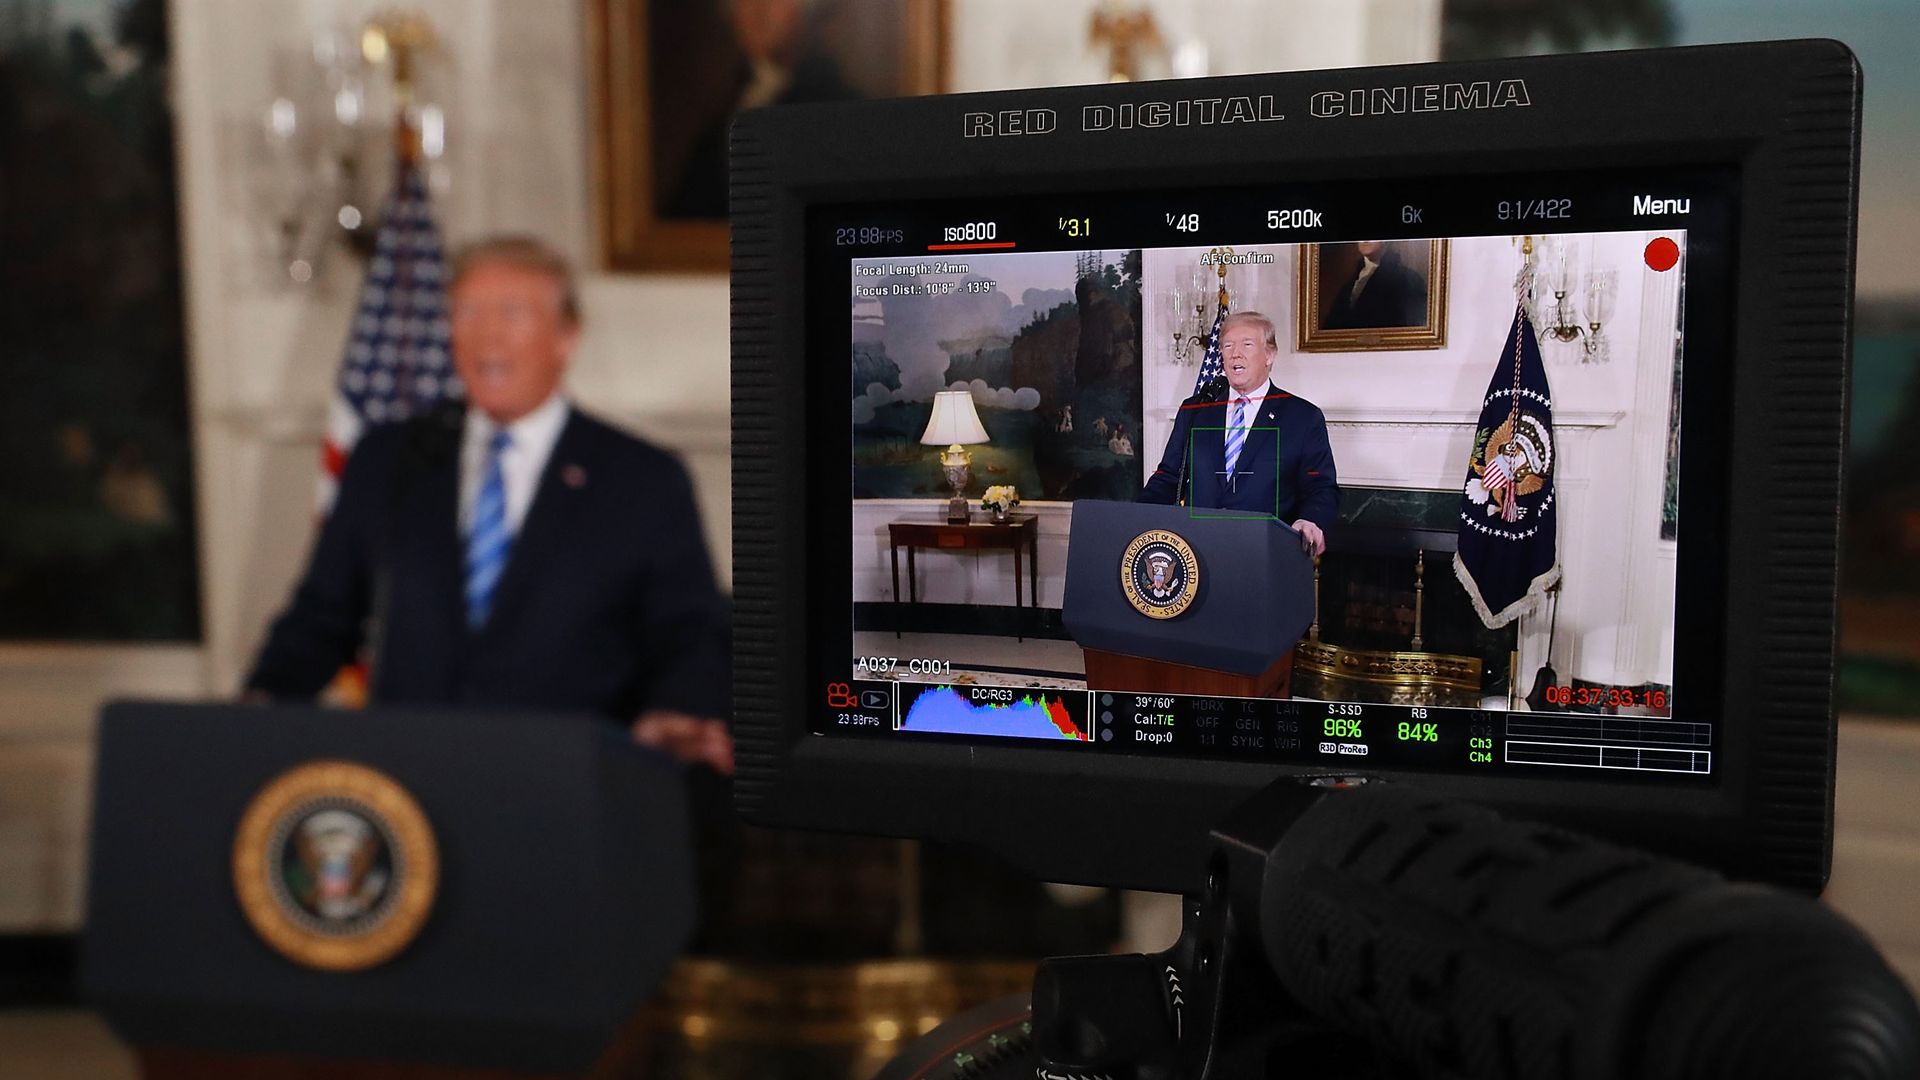 President Trump at podium next to video image of himself